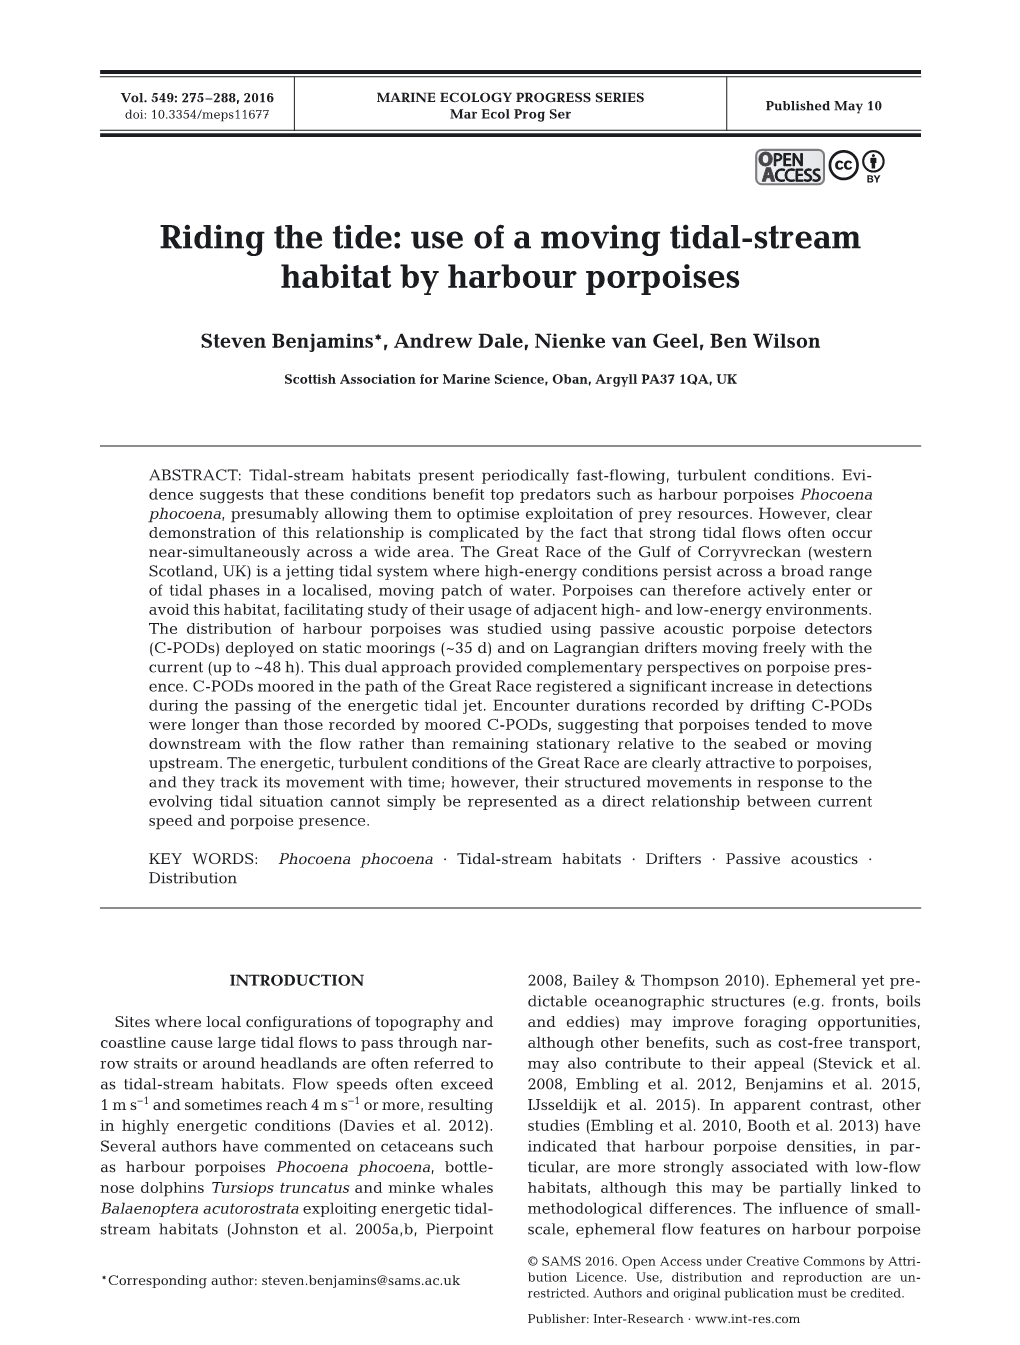 Riding the Tide: Use of a Moving Tidal-Stream Habitat by Harbour Porpoises